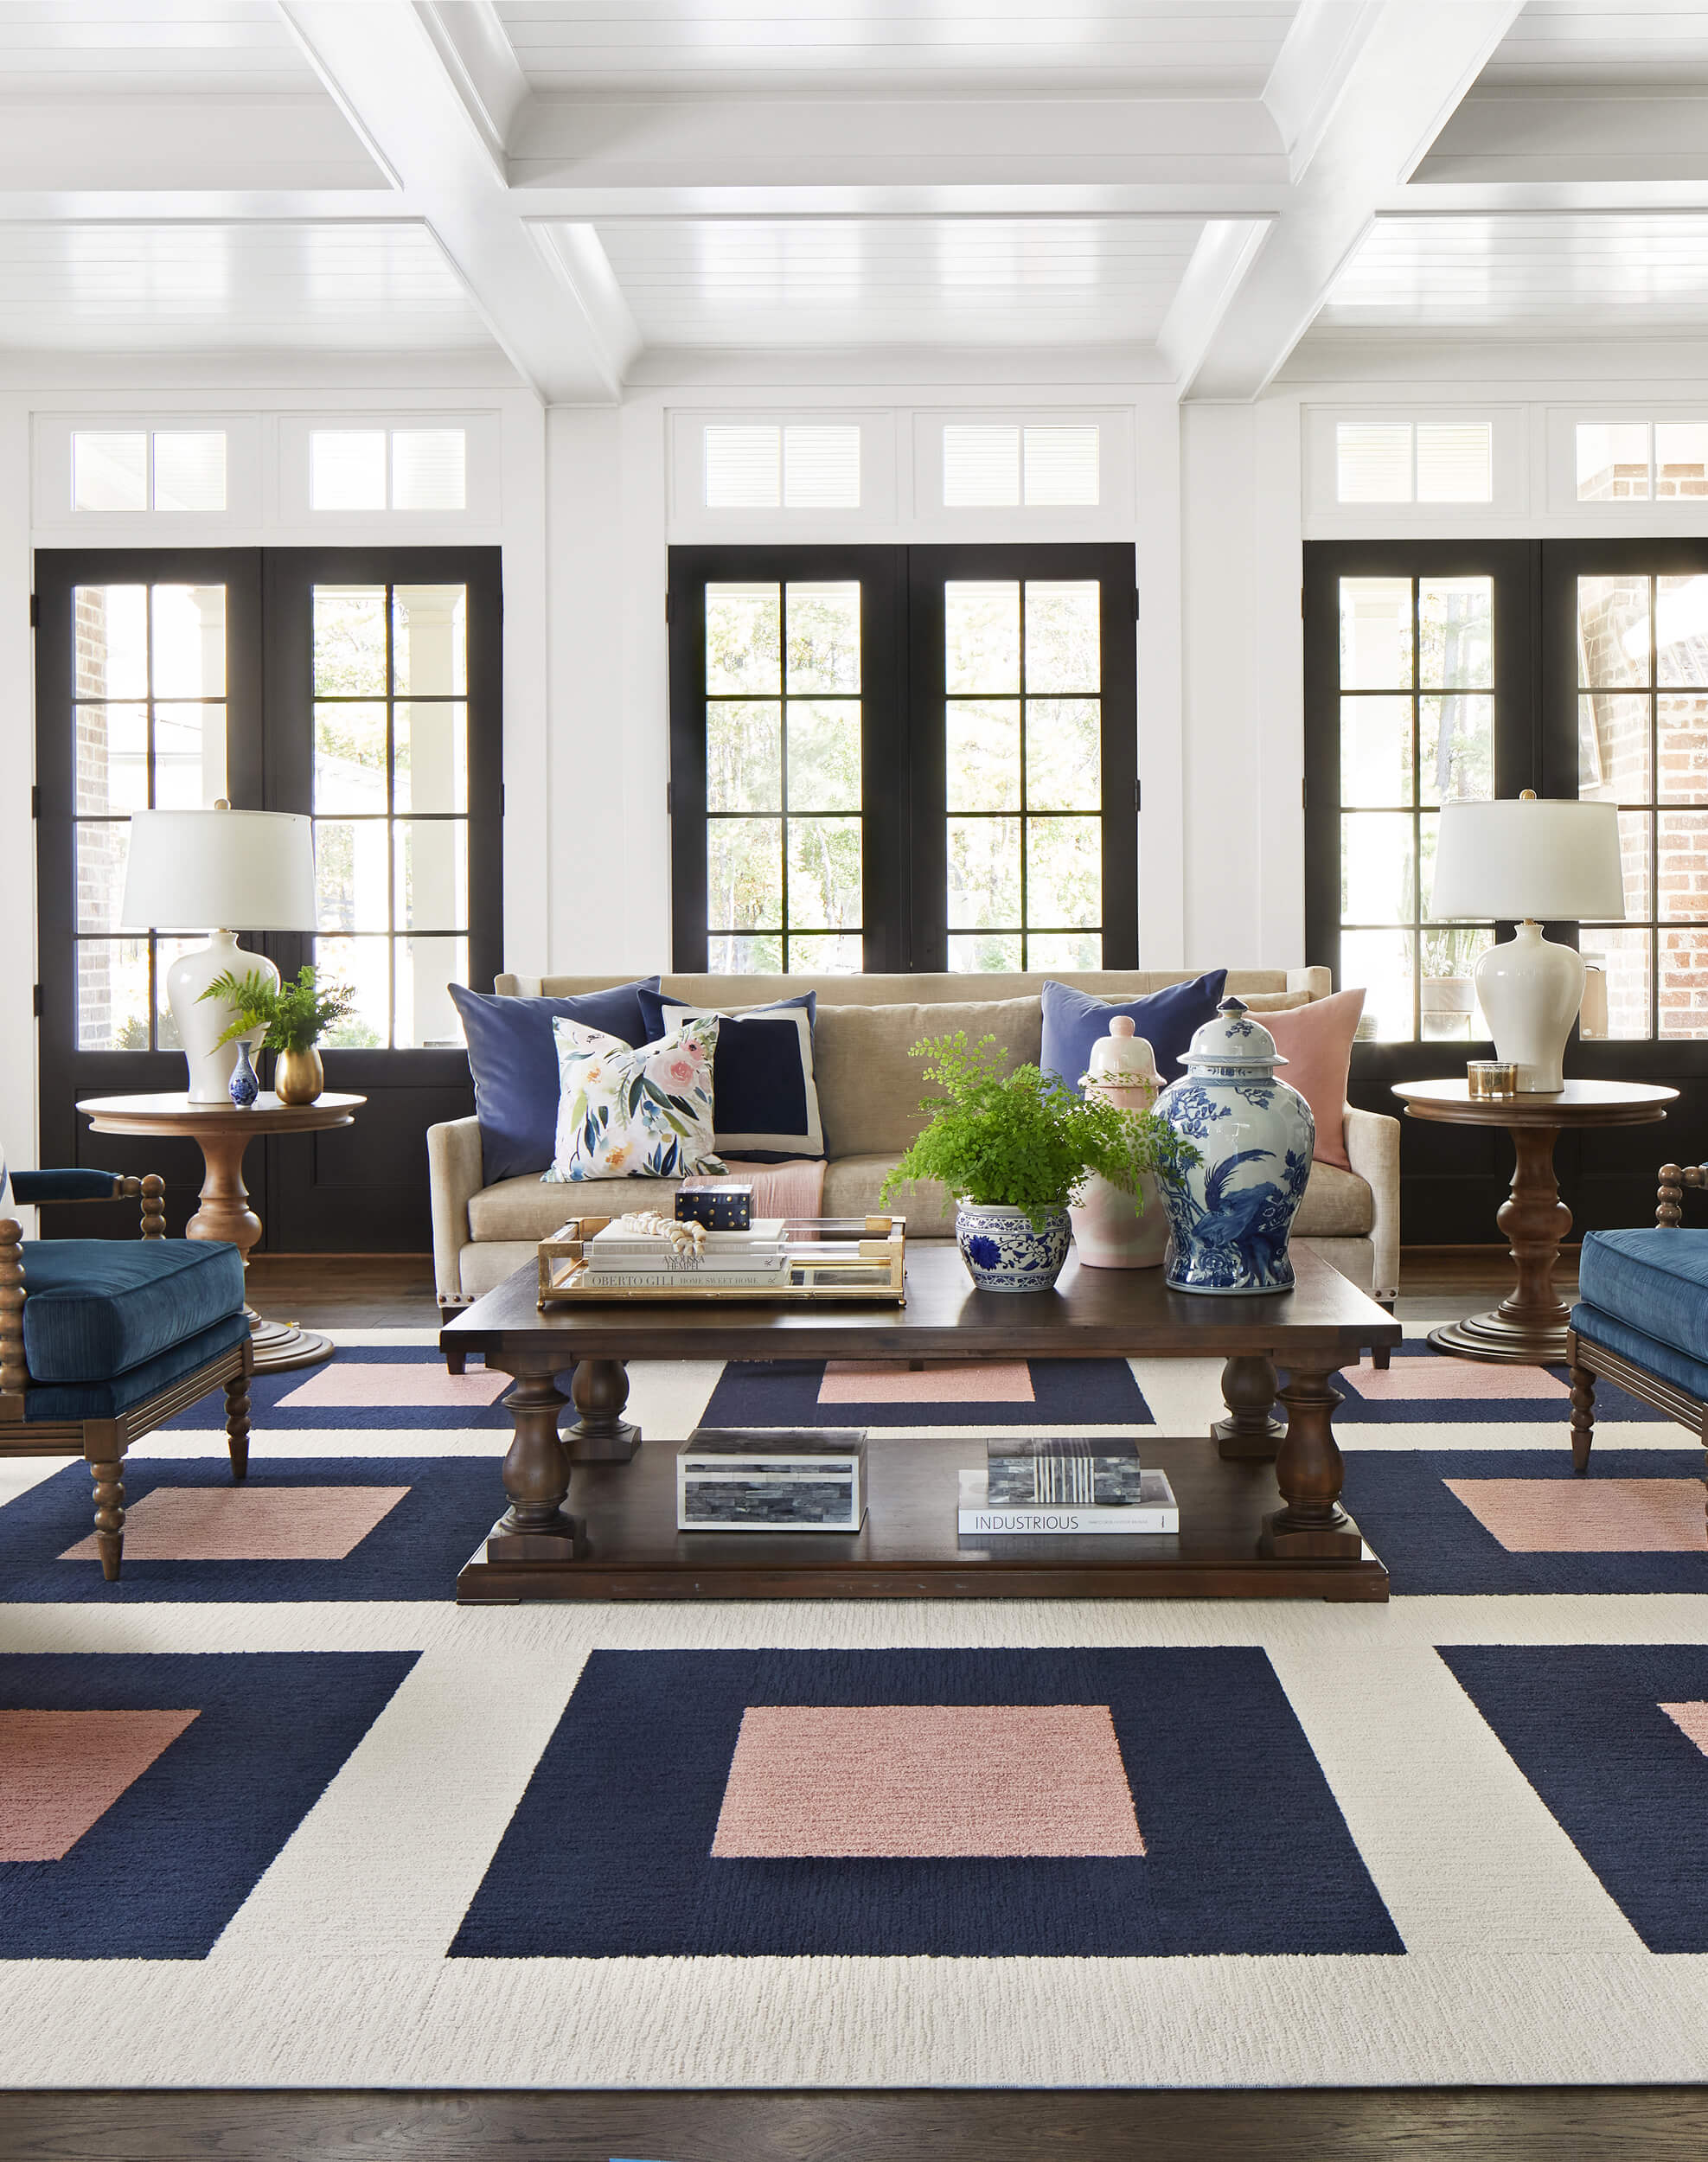 FLOR Made You Look area rug in Bone, Blush, and Indigo.